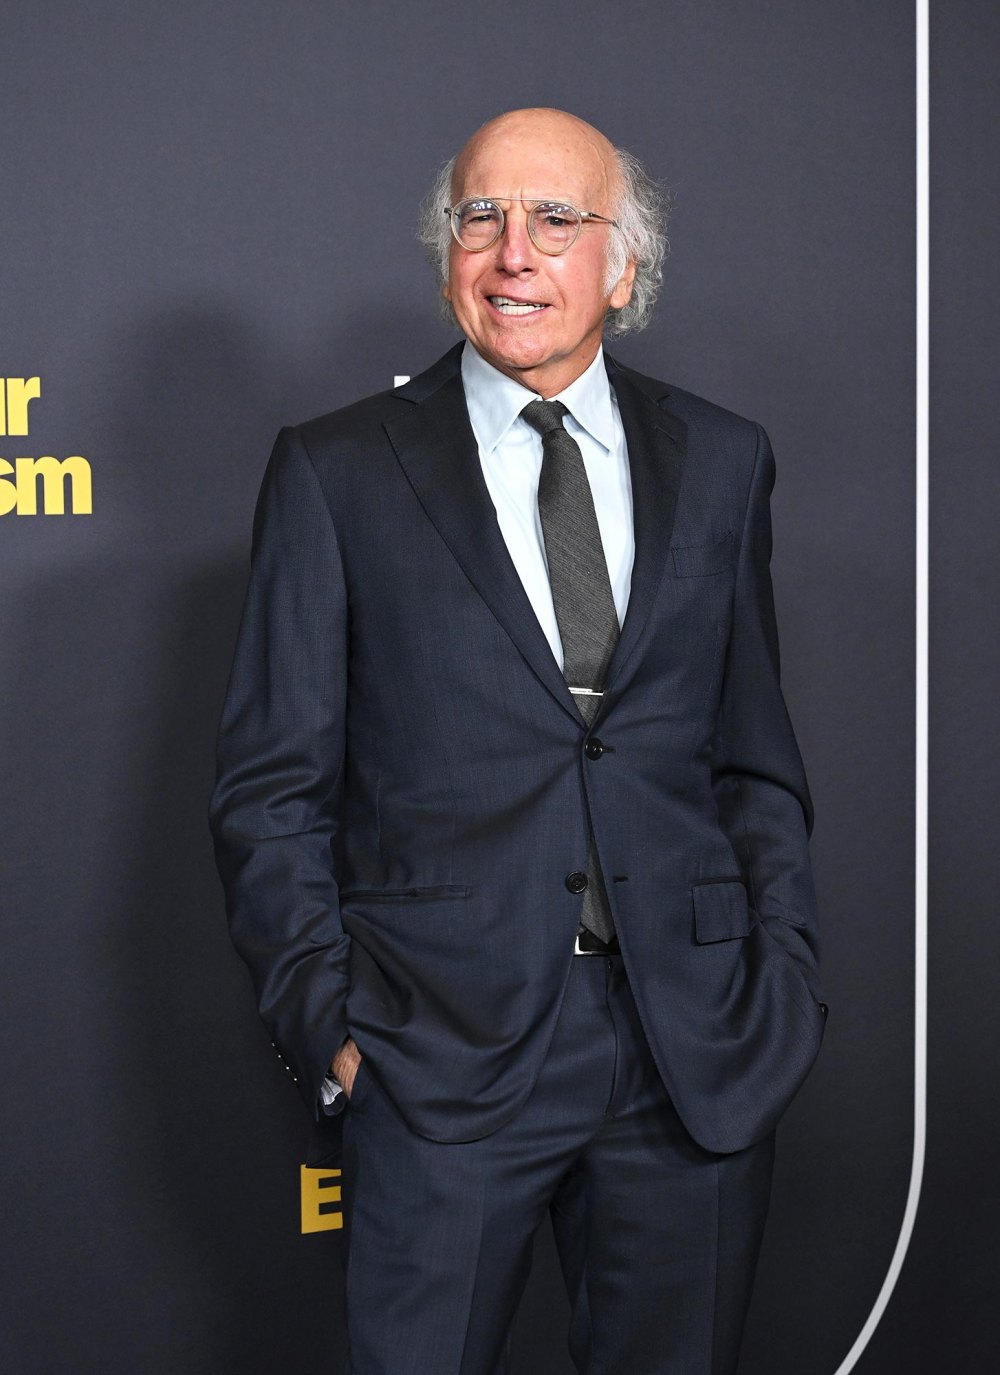 Larry David Says None of Your Fking Business When Asked About His Net Worth